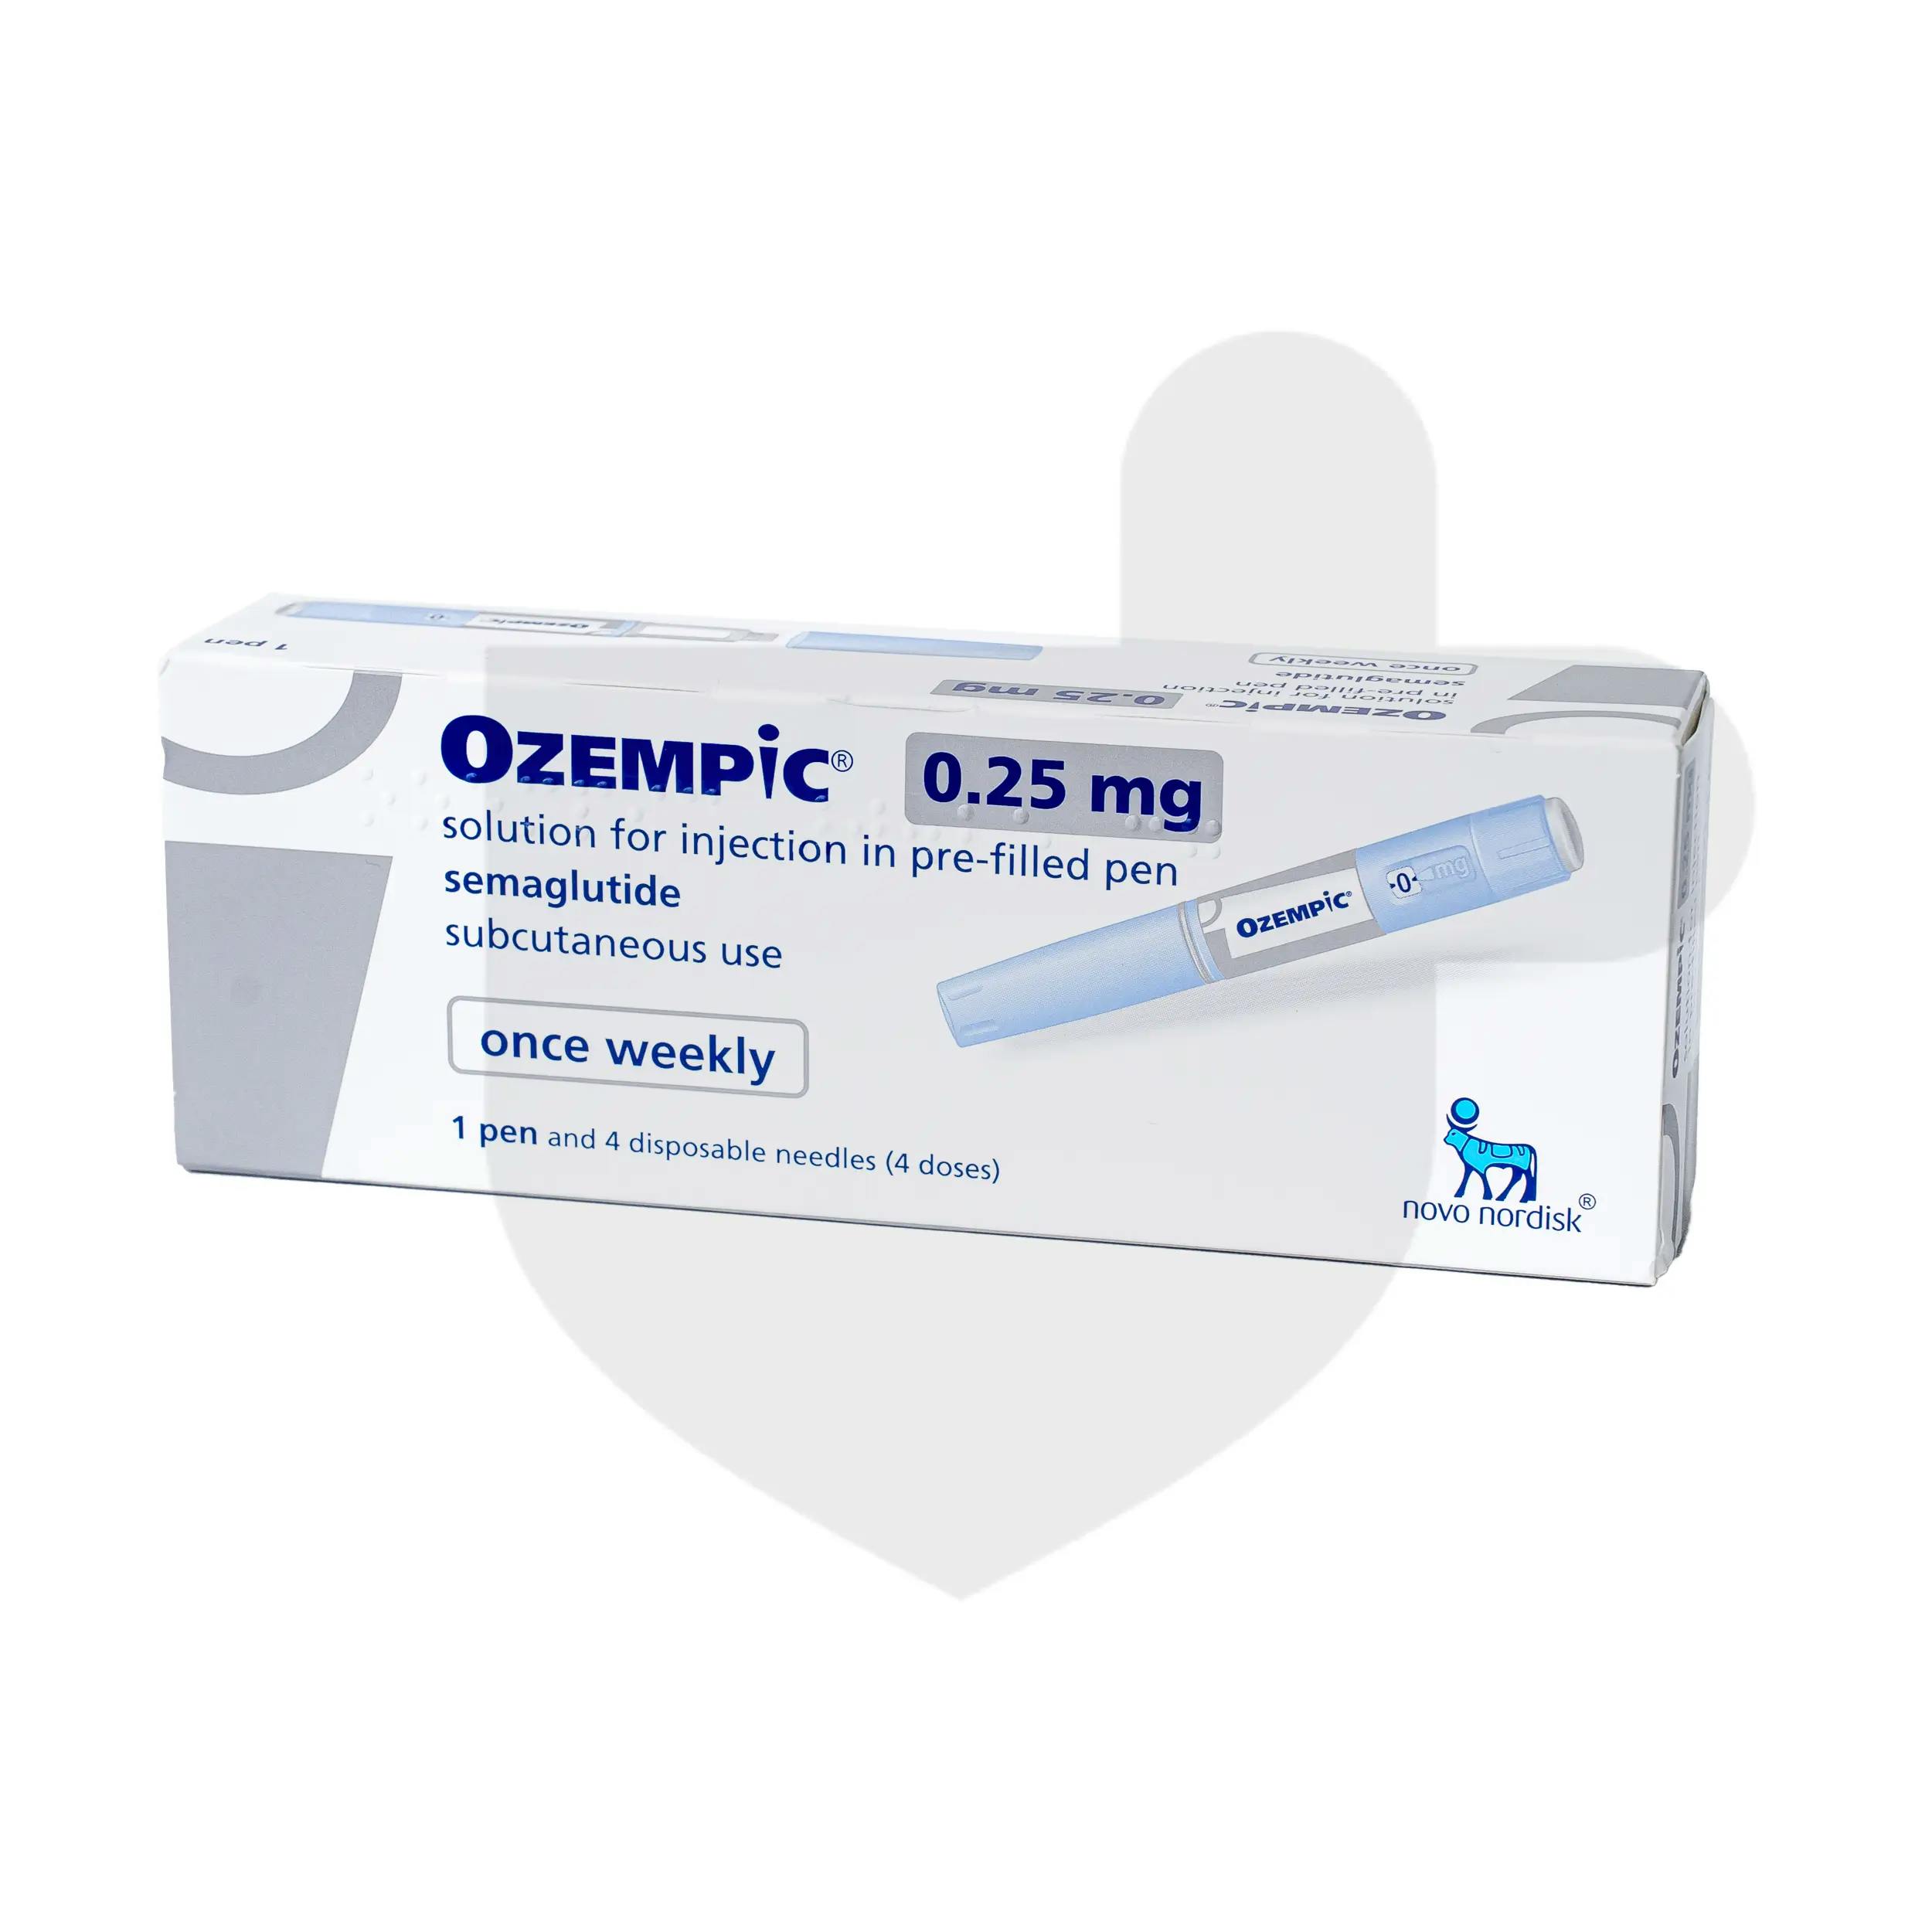 OZEMPIC <sup class="brand-mark">®</sup>